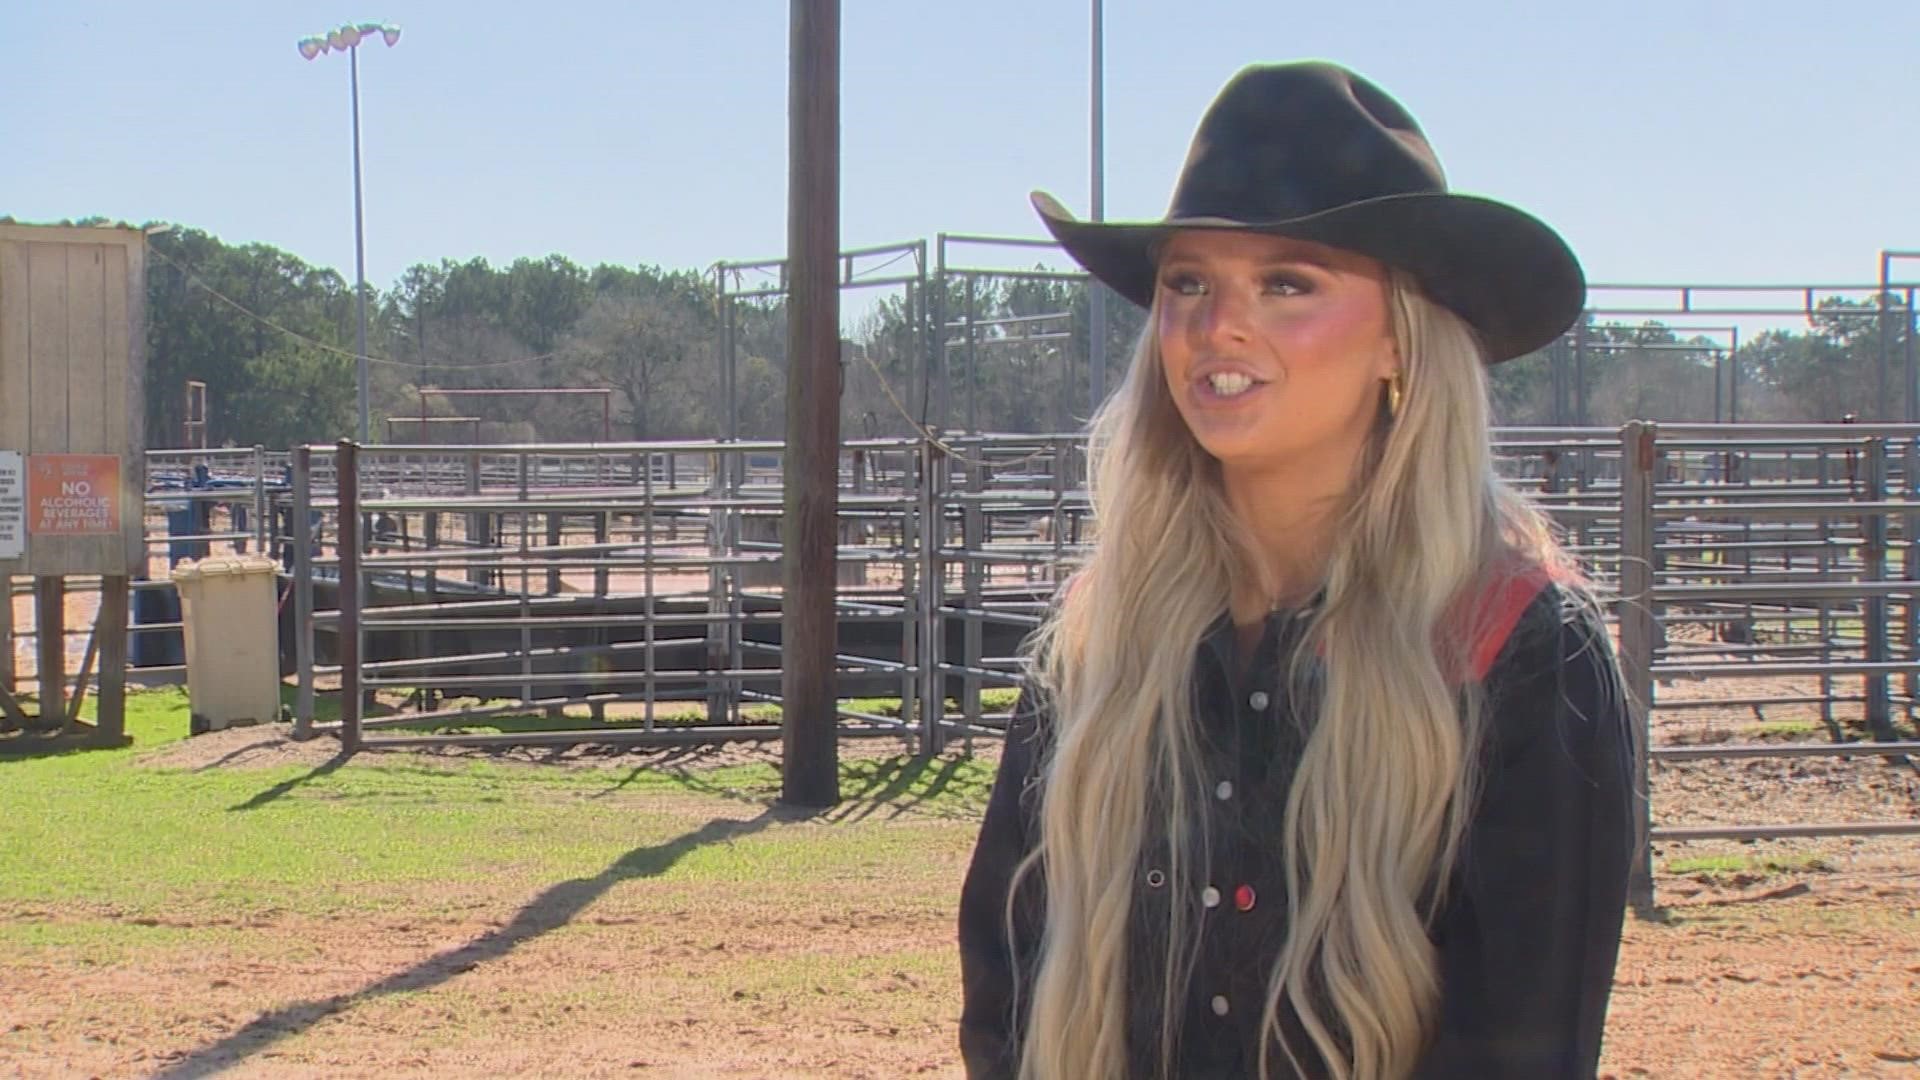 Grover is one of the best barrel racers in the South and she's not stopping there, she's also on her way to becoming a doctor.